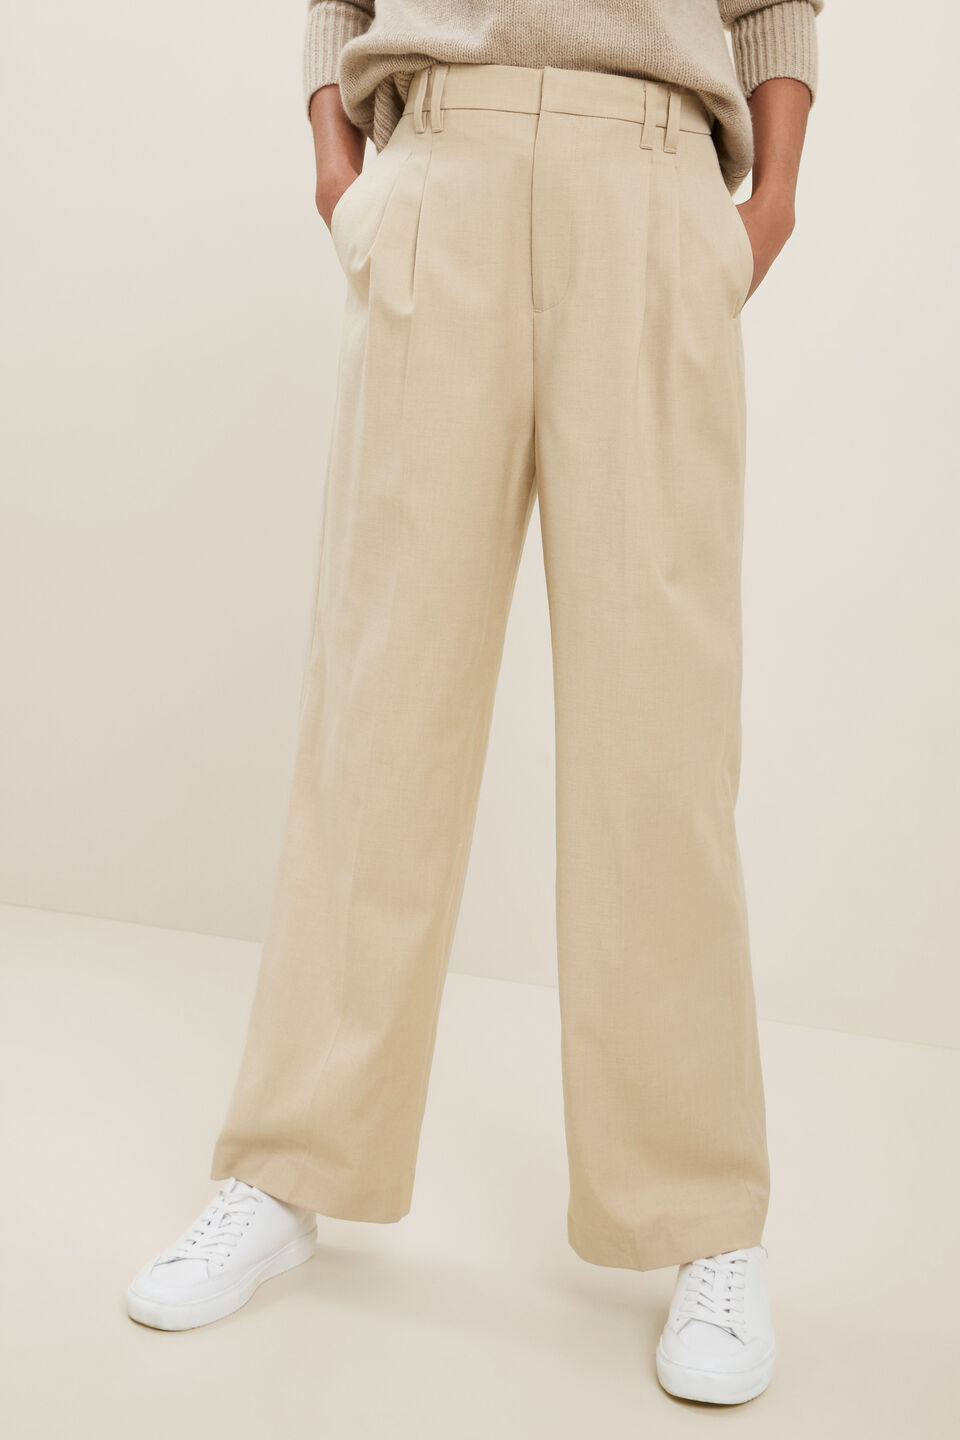 Twill Tailored Pant  Champagne Beige